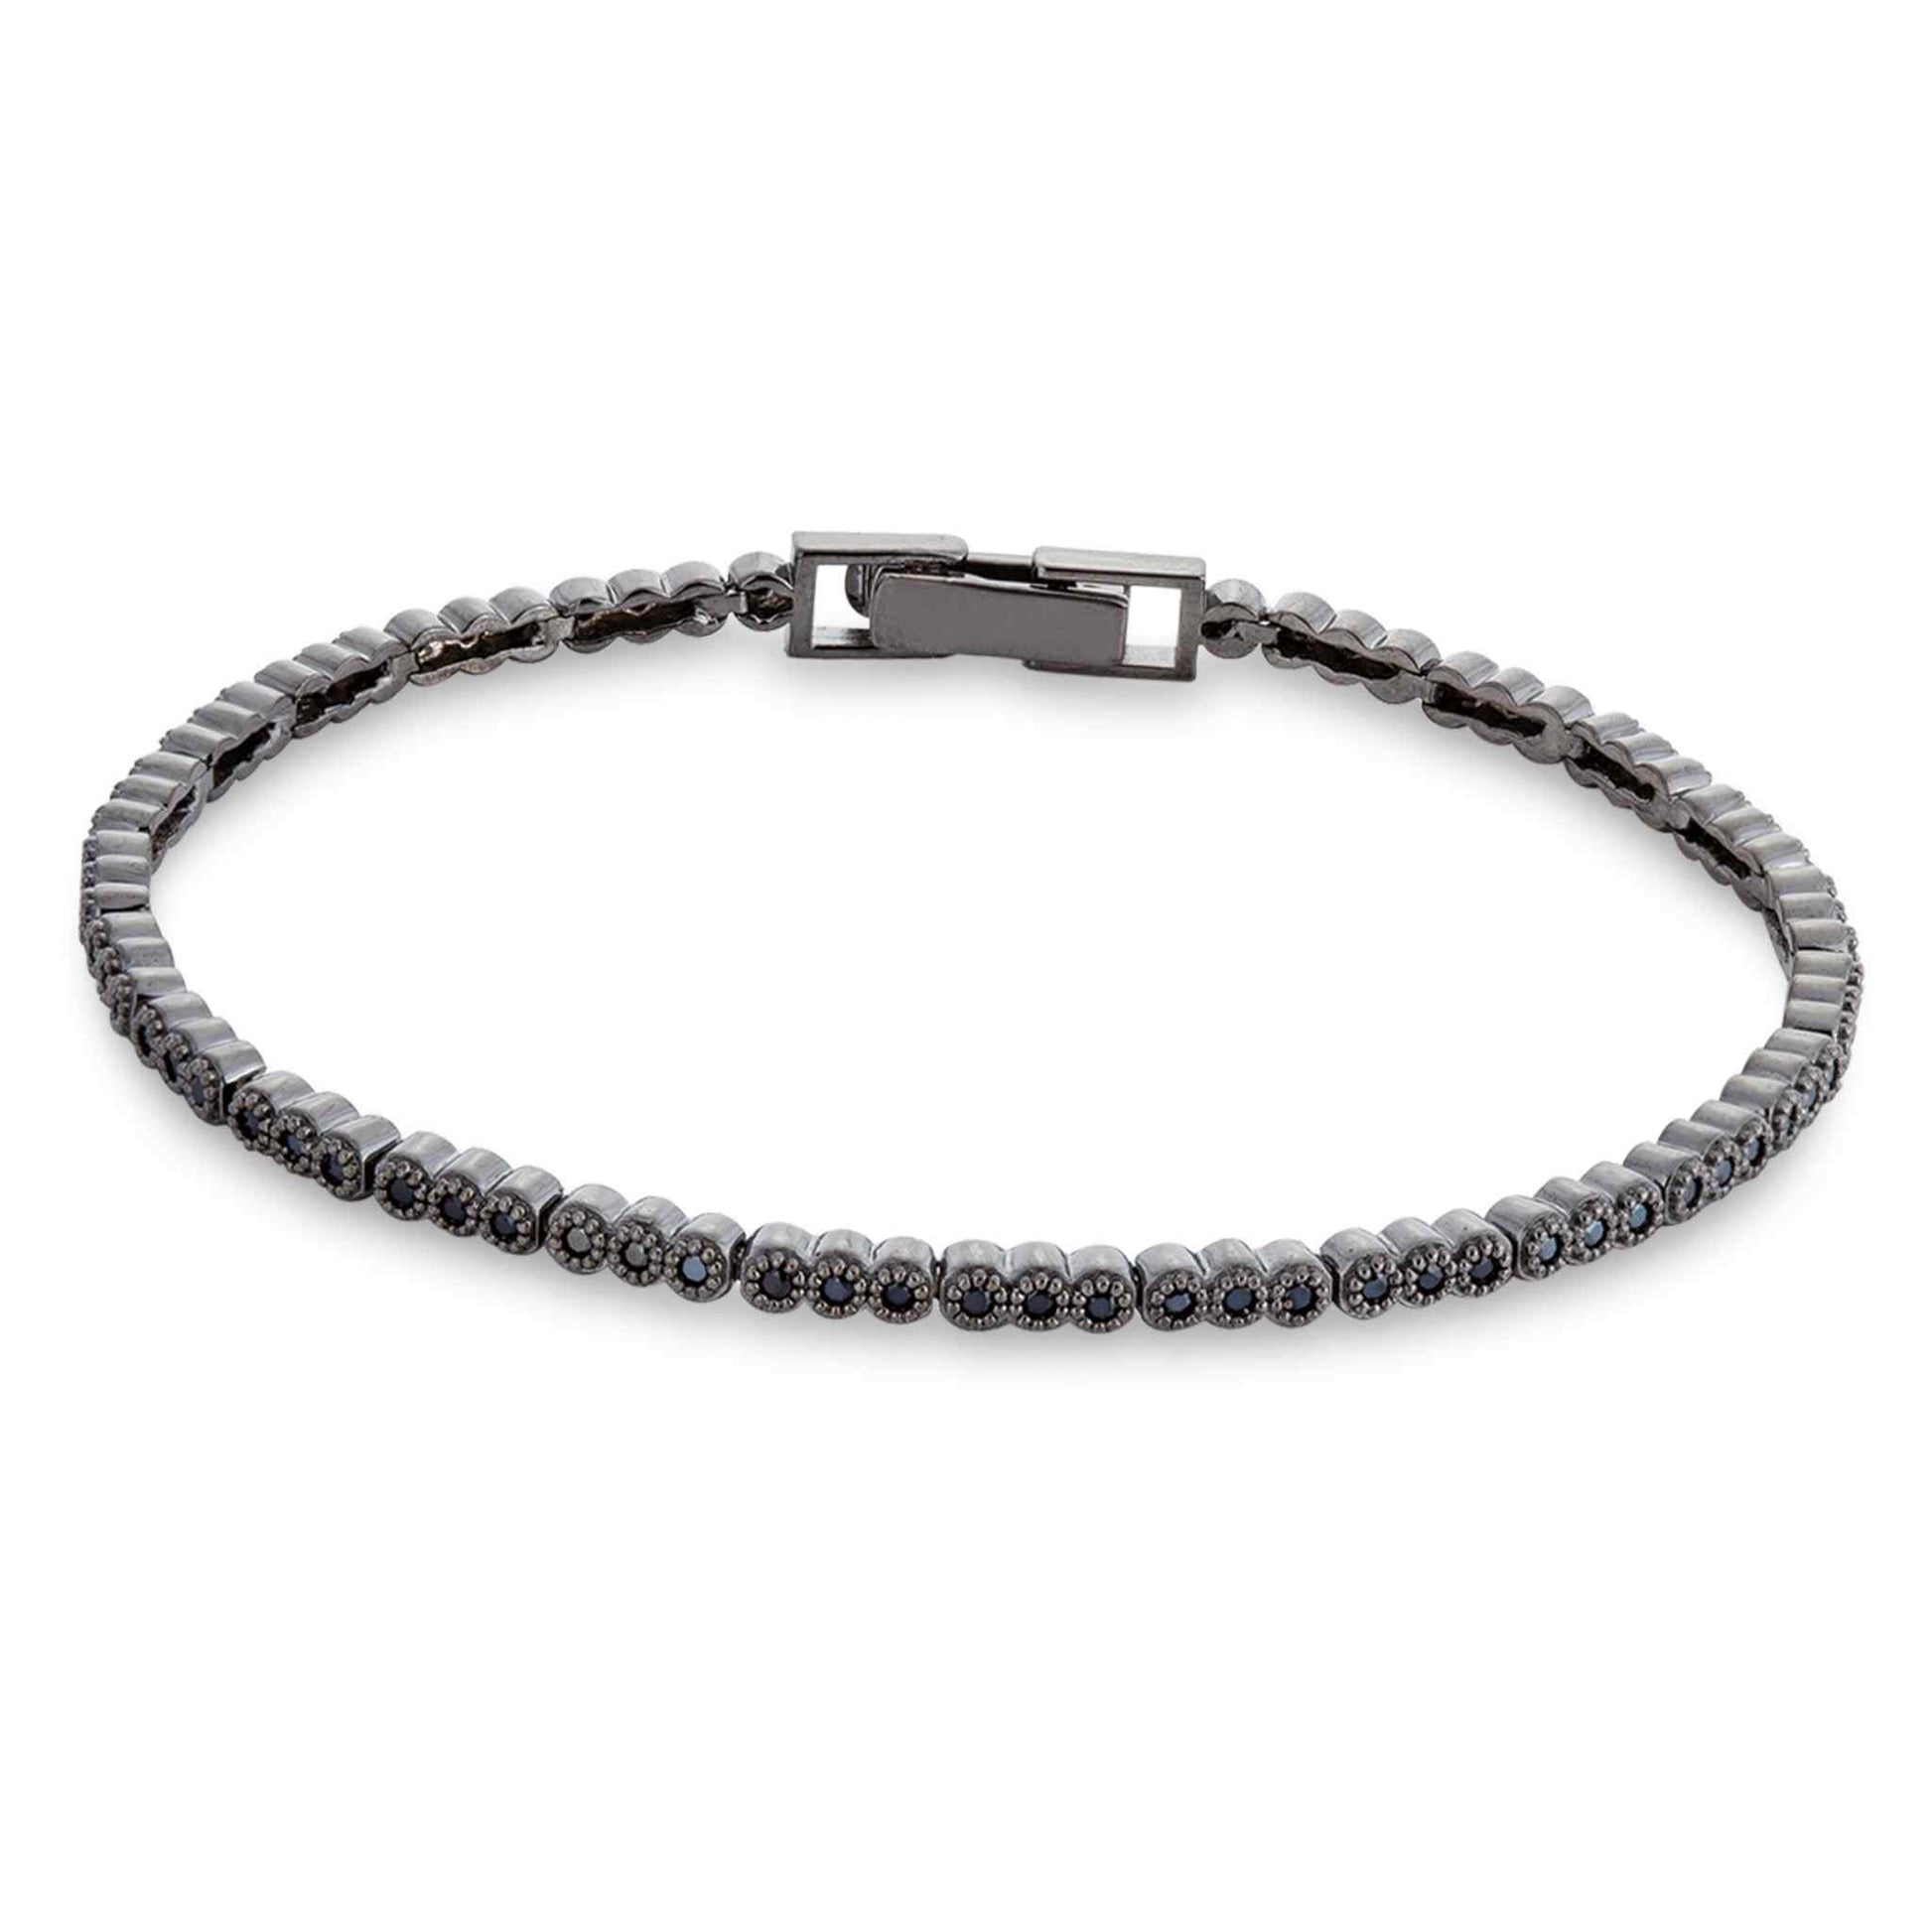 A vintage-style bracelet with black simulated diamonds displayed on a neutral white background.